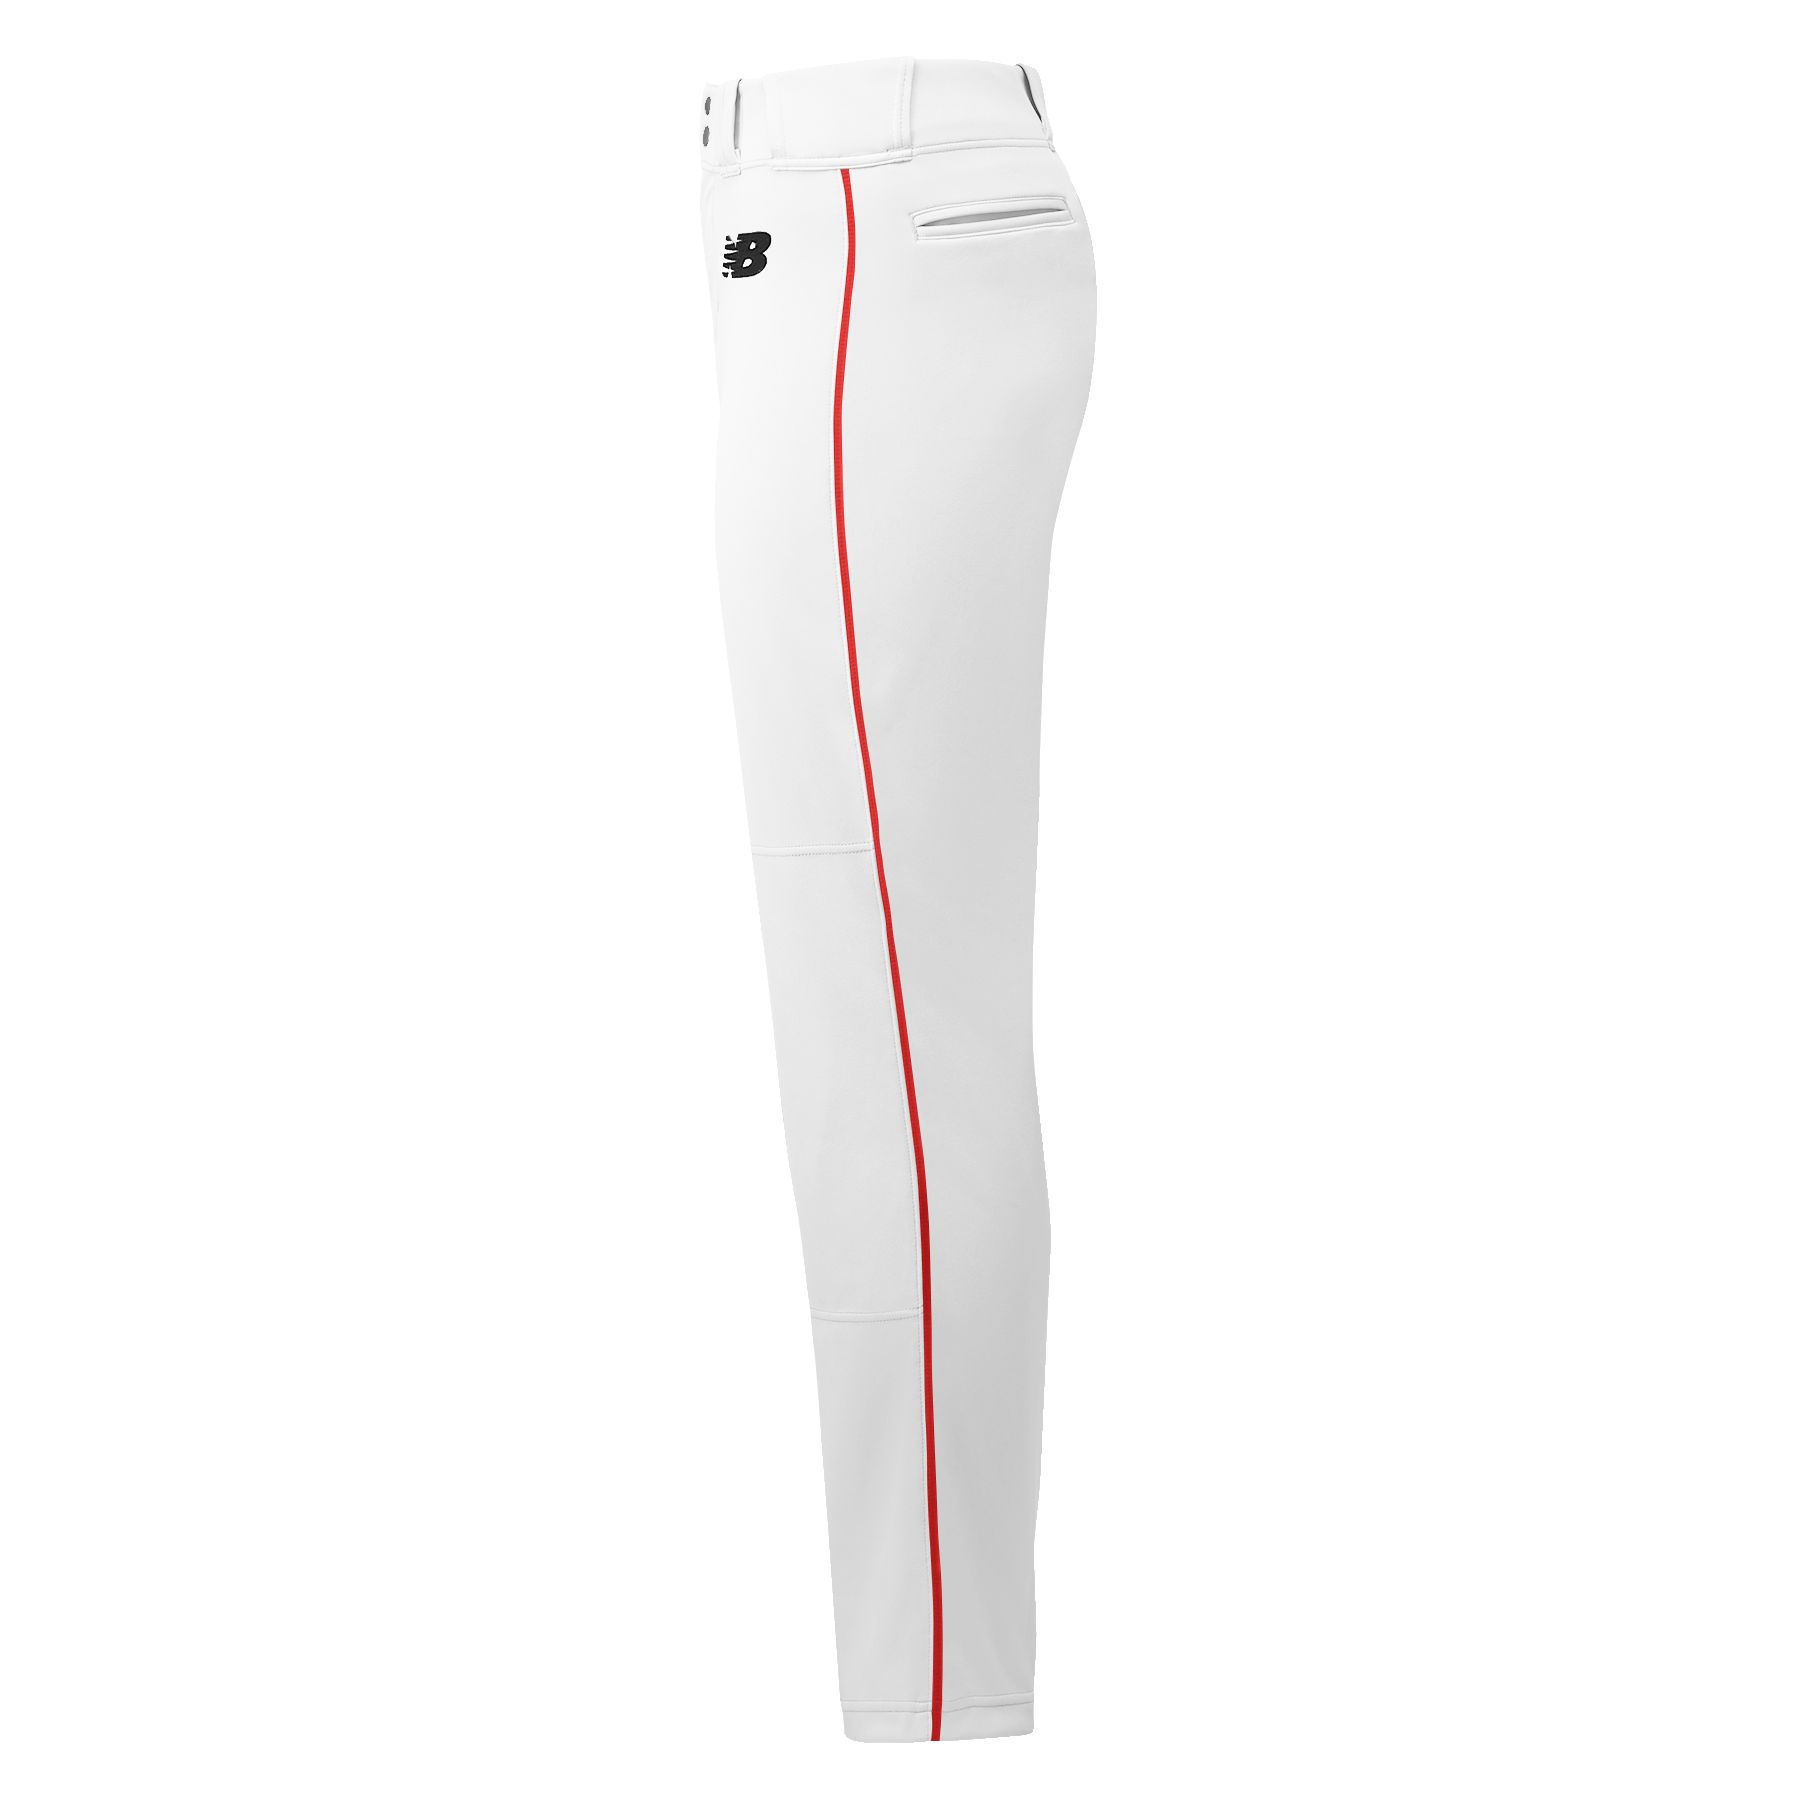 New Balance Men's Adversary 2.0 Piped Tapered Baseball Pant White/Red S